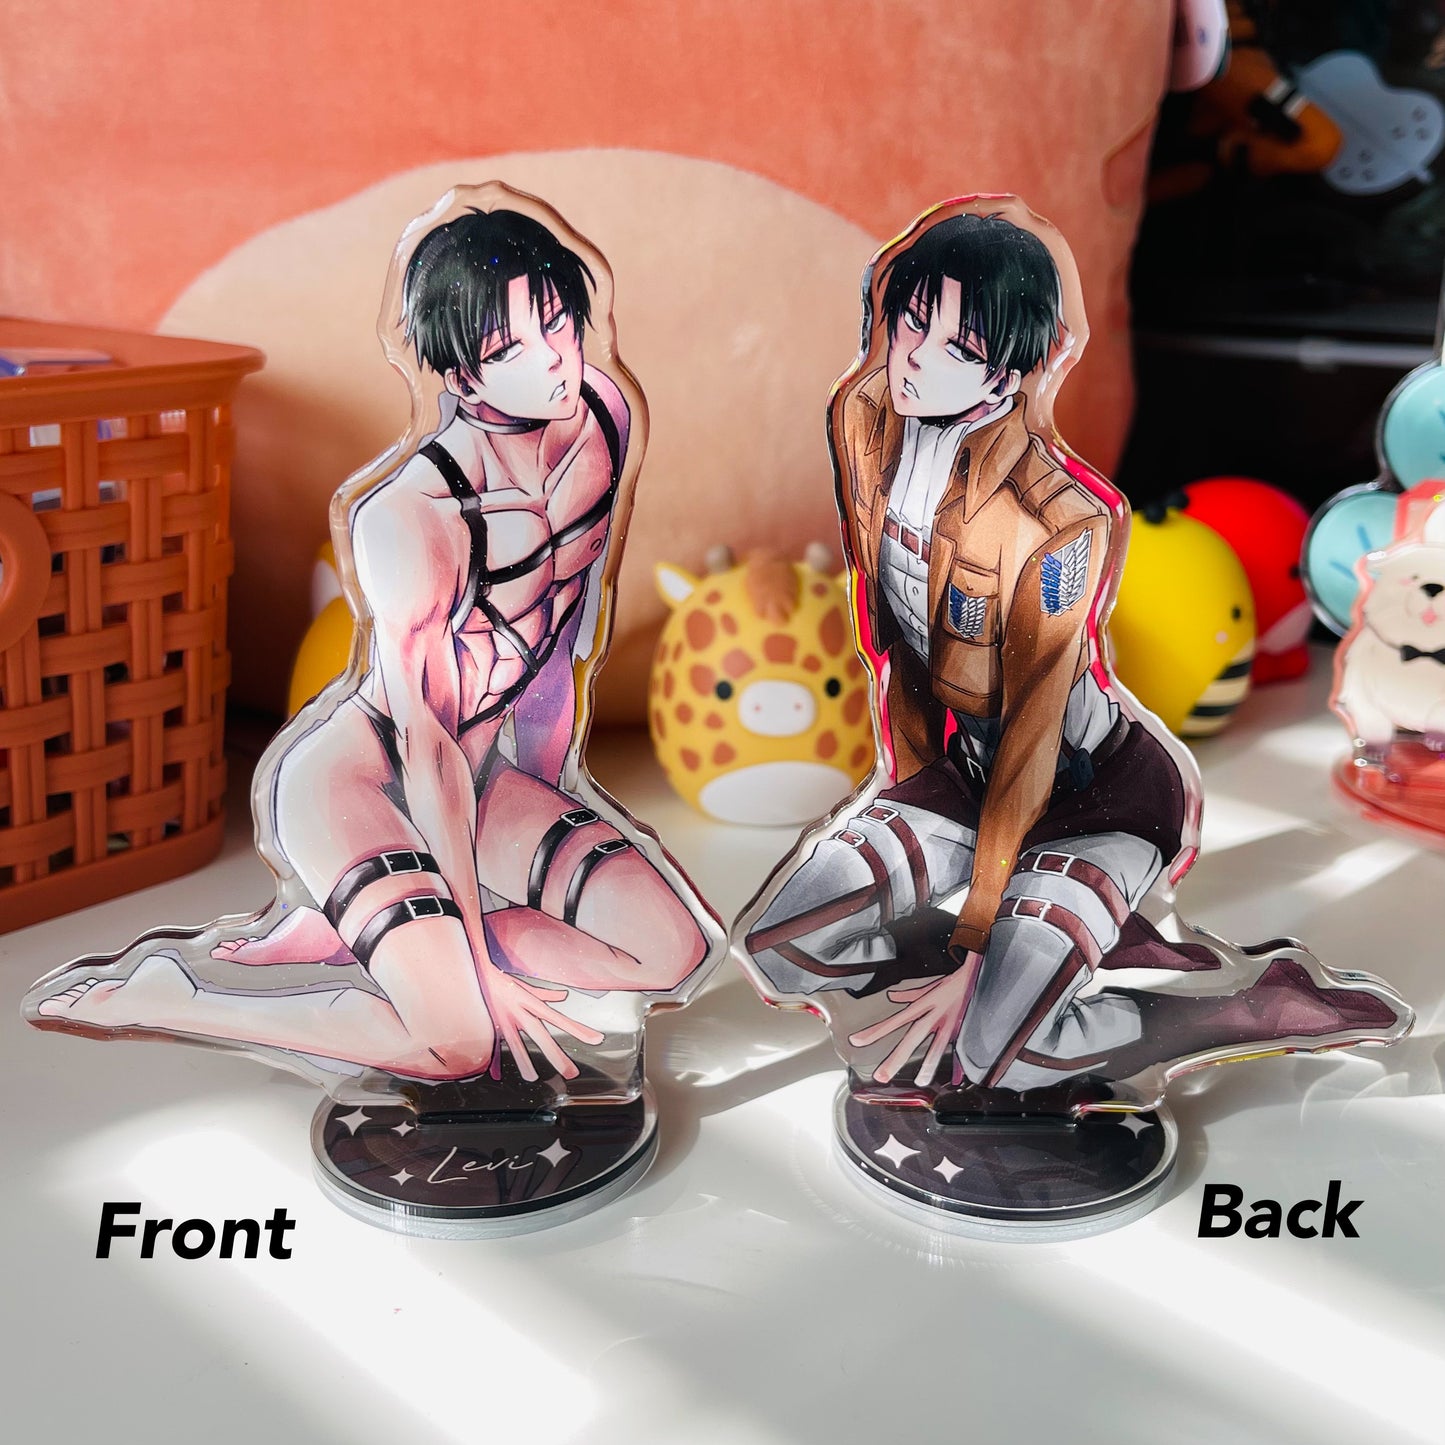 Levi Stands